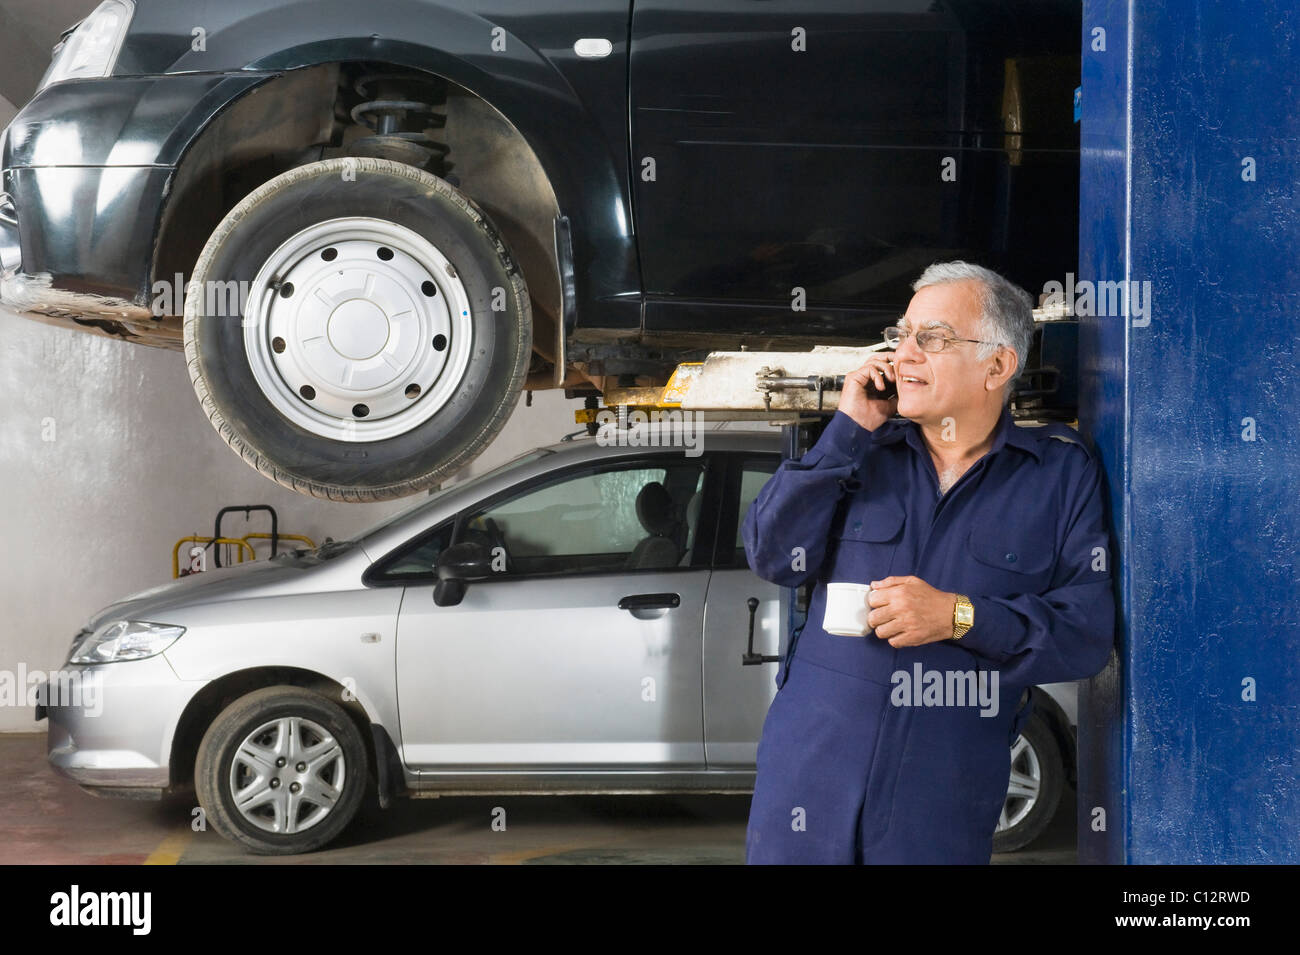 https://c8.alamy.com/comp/C12RWD/auto-mechanic-talking-on-a-mobile-phone-while-drinking-coffee-in-a-C12RWD.jpg